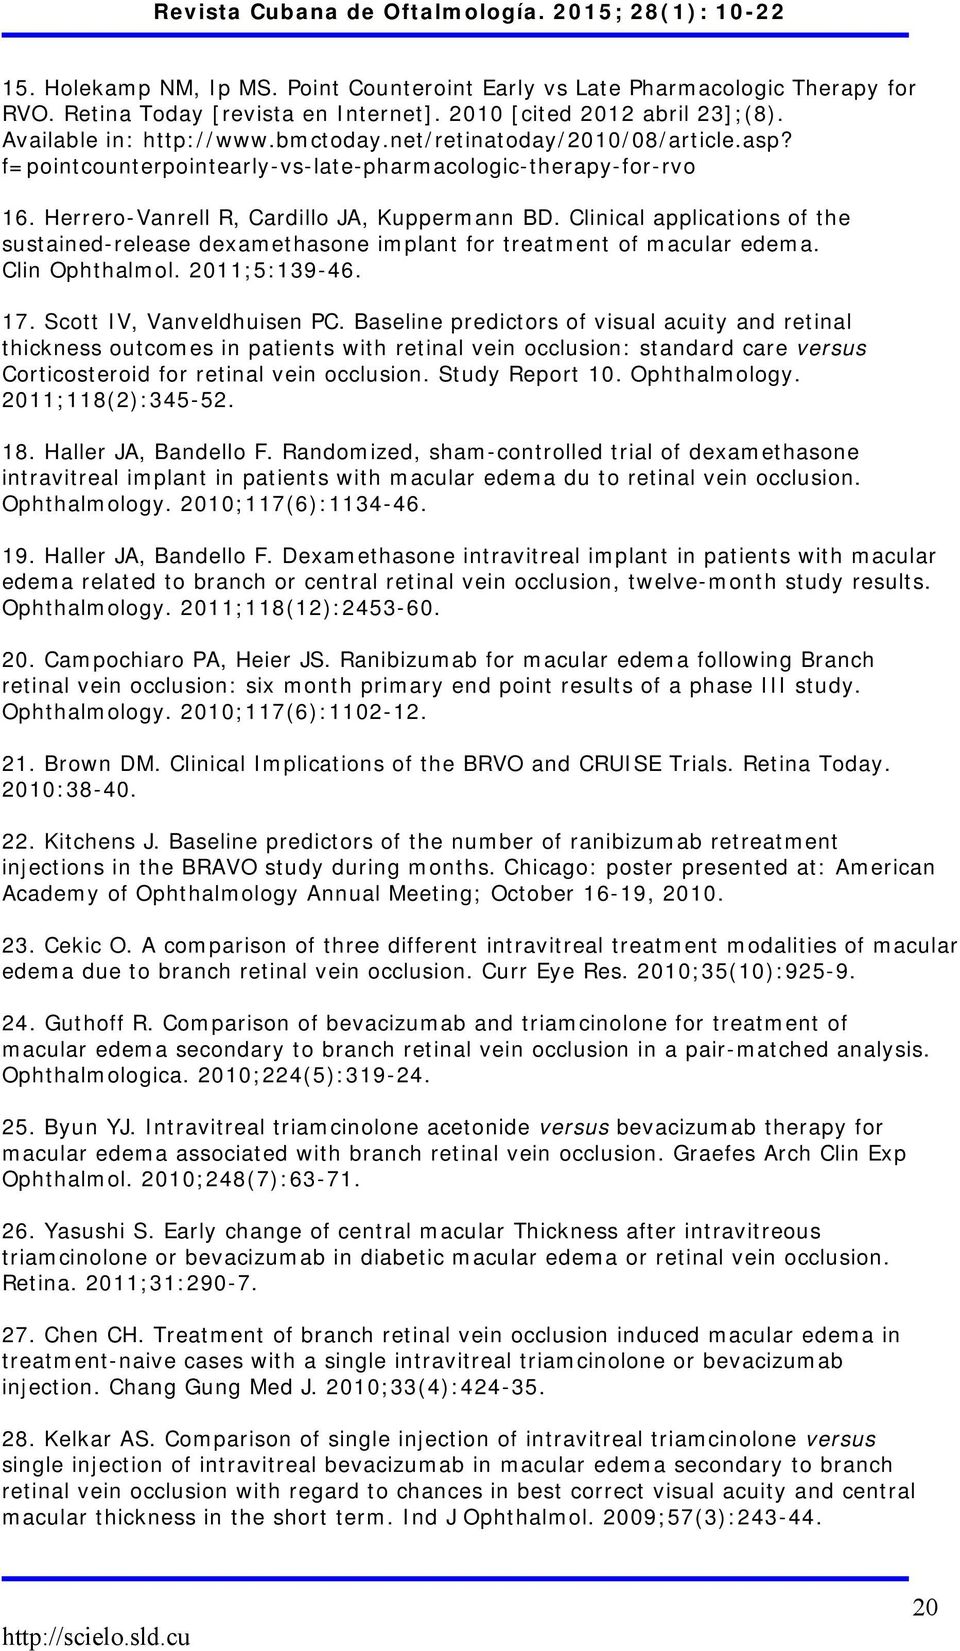 Clinical applications of the sustained-release dexamethasone implant for treatment of macular edema. Clin Ophthalmol. 2011;5:139-46. 17. Scott IV, Vanveldhuisen PC.